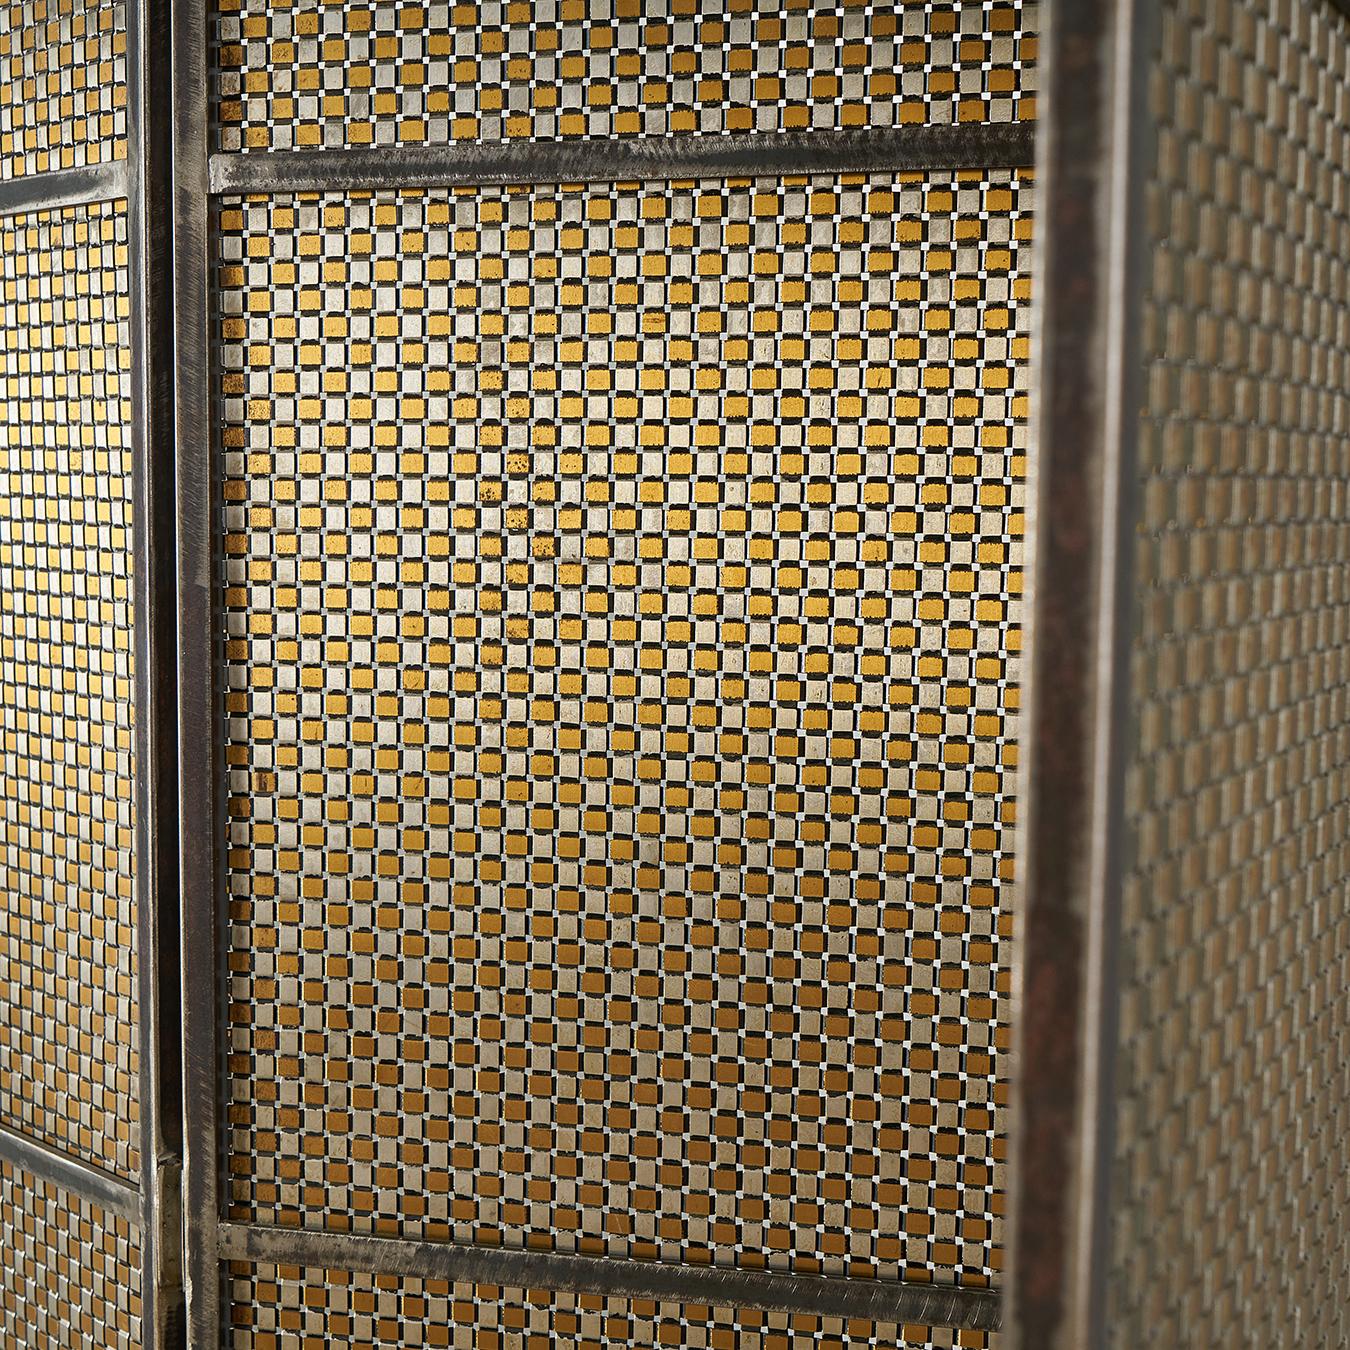 Artist Made Metal Folding Screen Room Divider, Maurice Beane  In Good Condition For Sale In Greensboro, NC